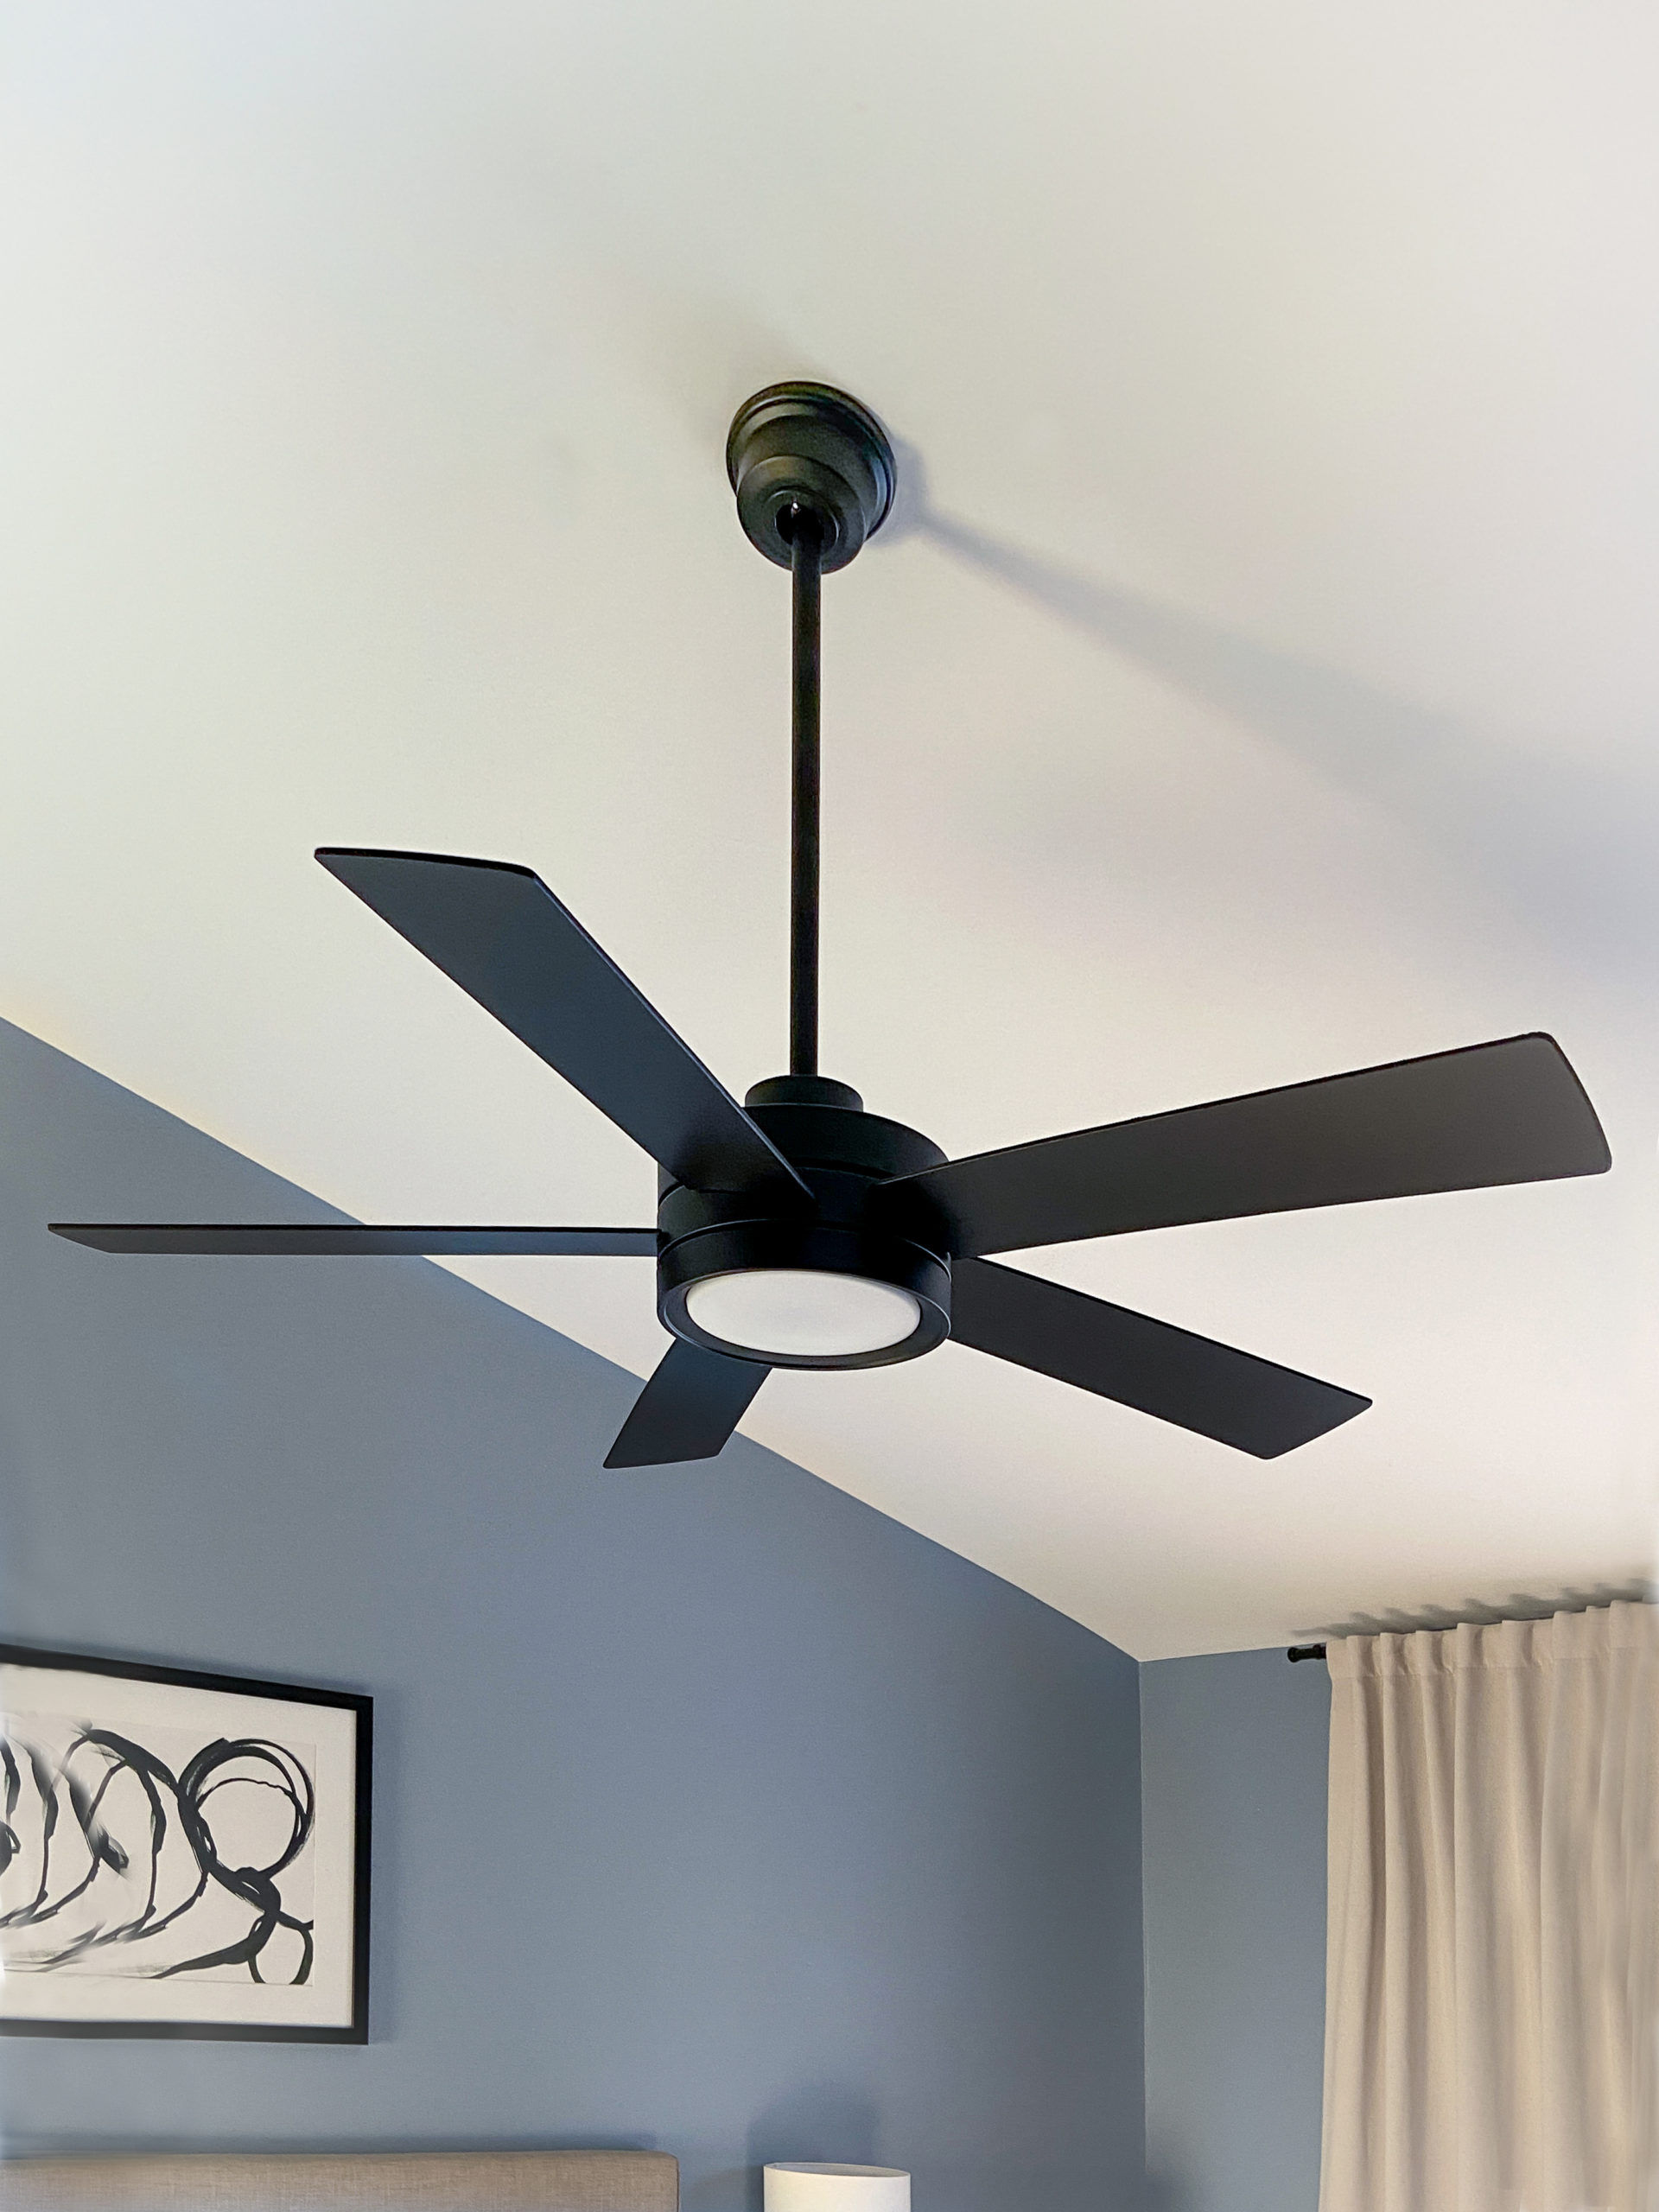 Do All Ceiling Fans Work With Wall Switch?